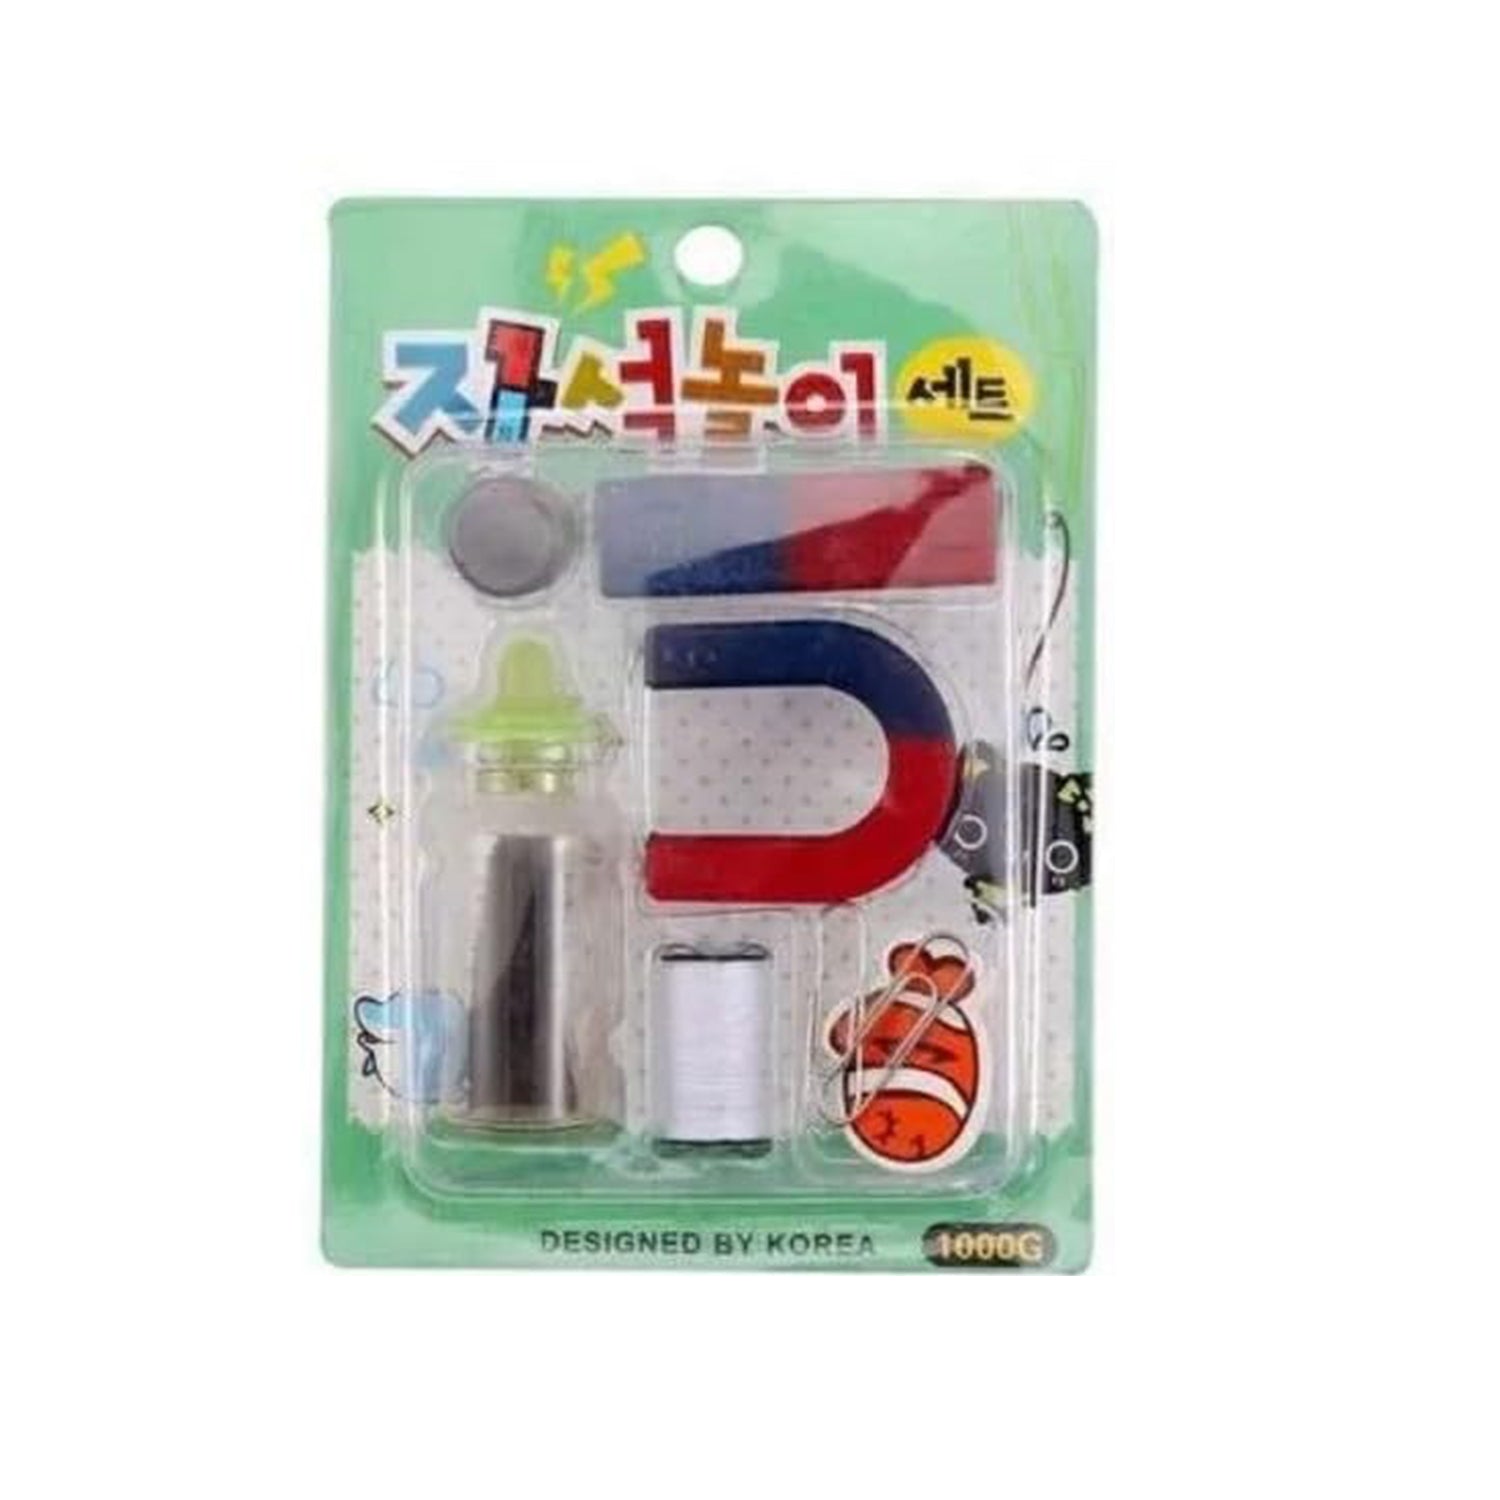 8880 Teaching Aids Magnetic Science Kit Funny Kids DIY Science Kits Educational Experiment Games